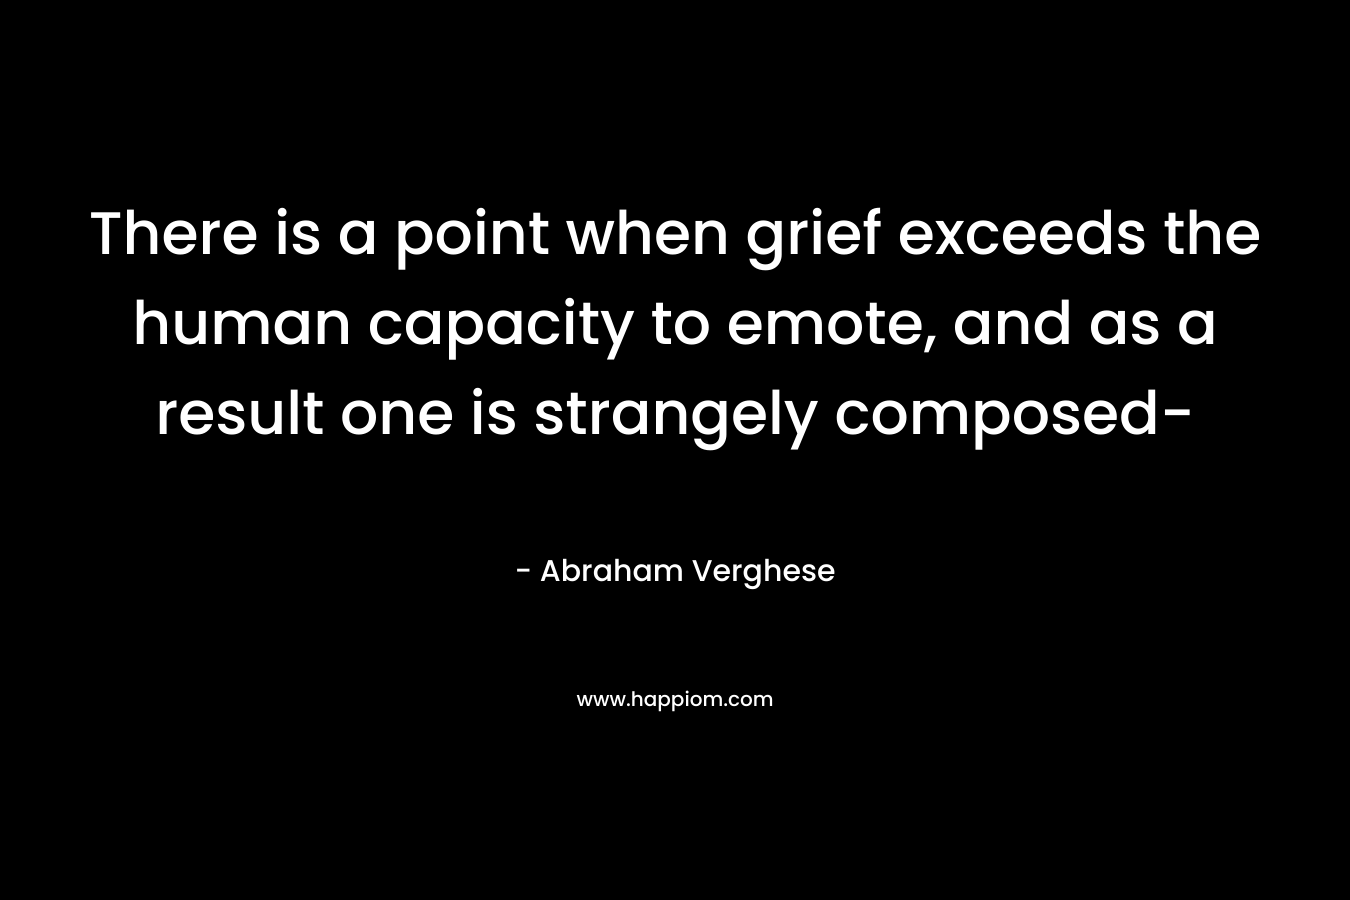 There is a point when grief exceeds the human capacity to emote, and as a result one is strangely composed-